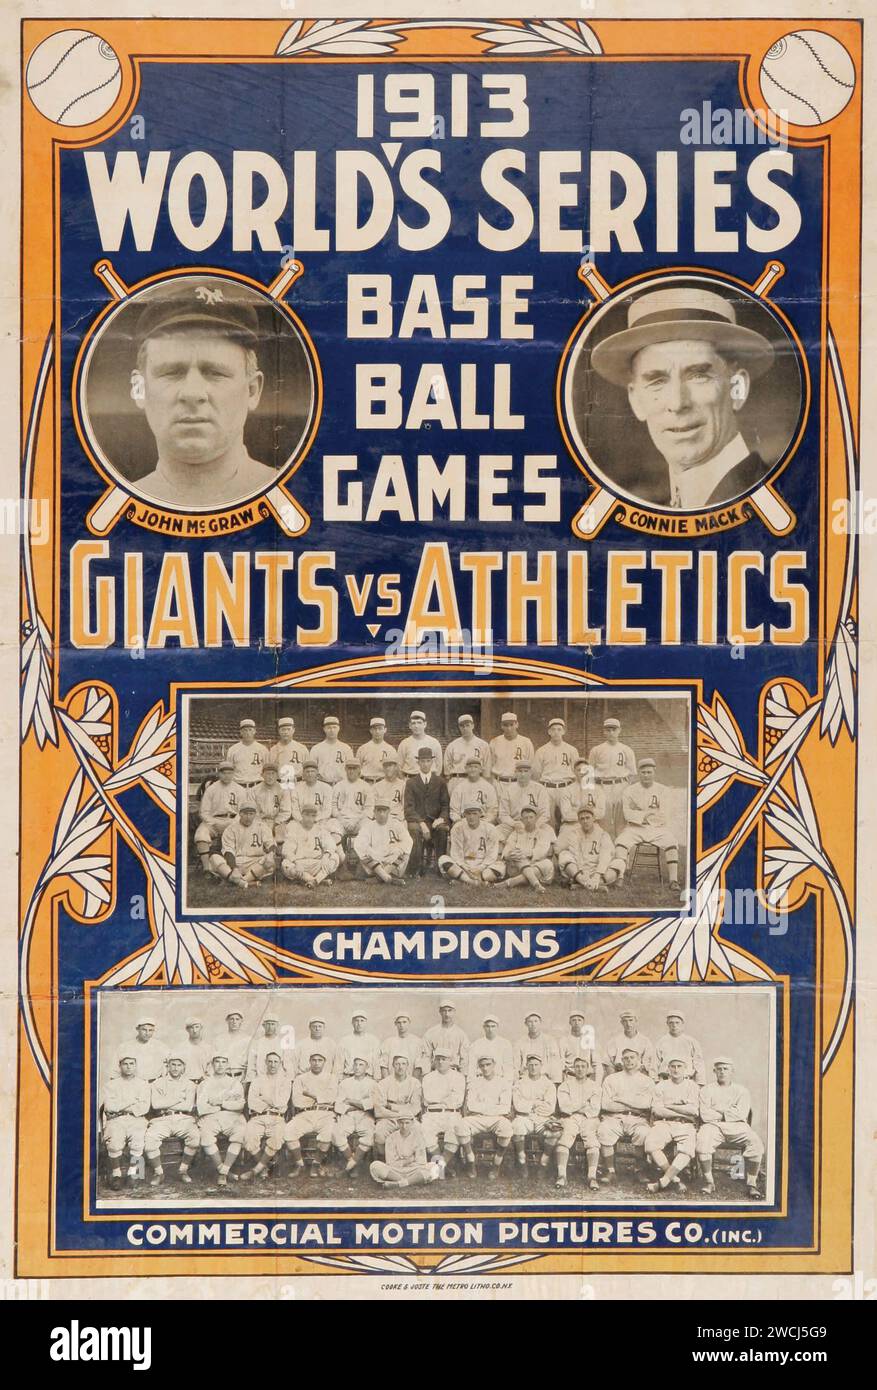 1913 Worlds Series Baseball Games, Giants vs Athletics - film poster - John McGraw and Connie Mack - Commercial Motion Pictures Co Stock Photo